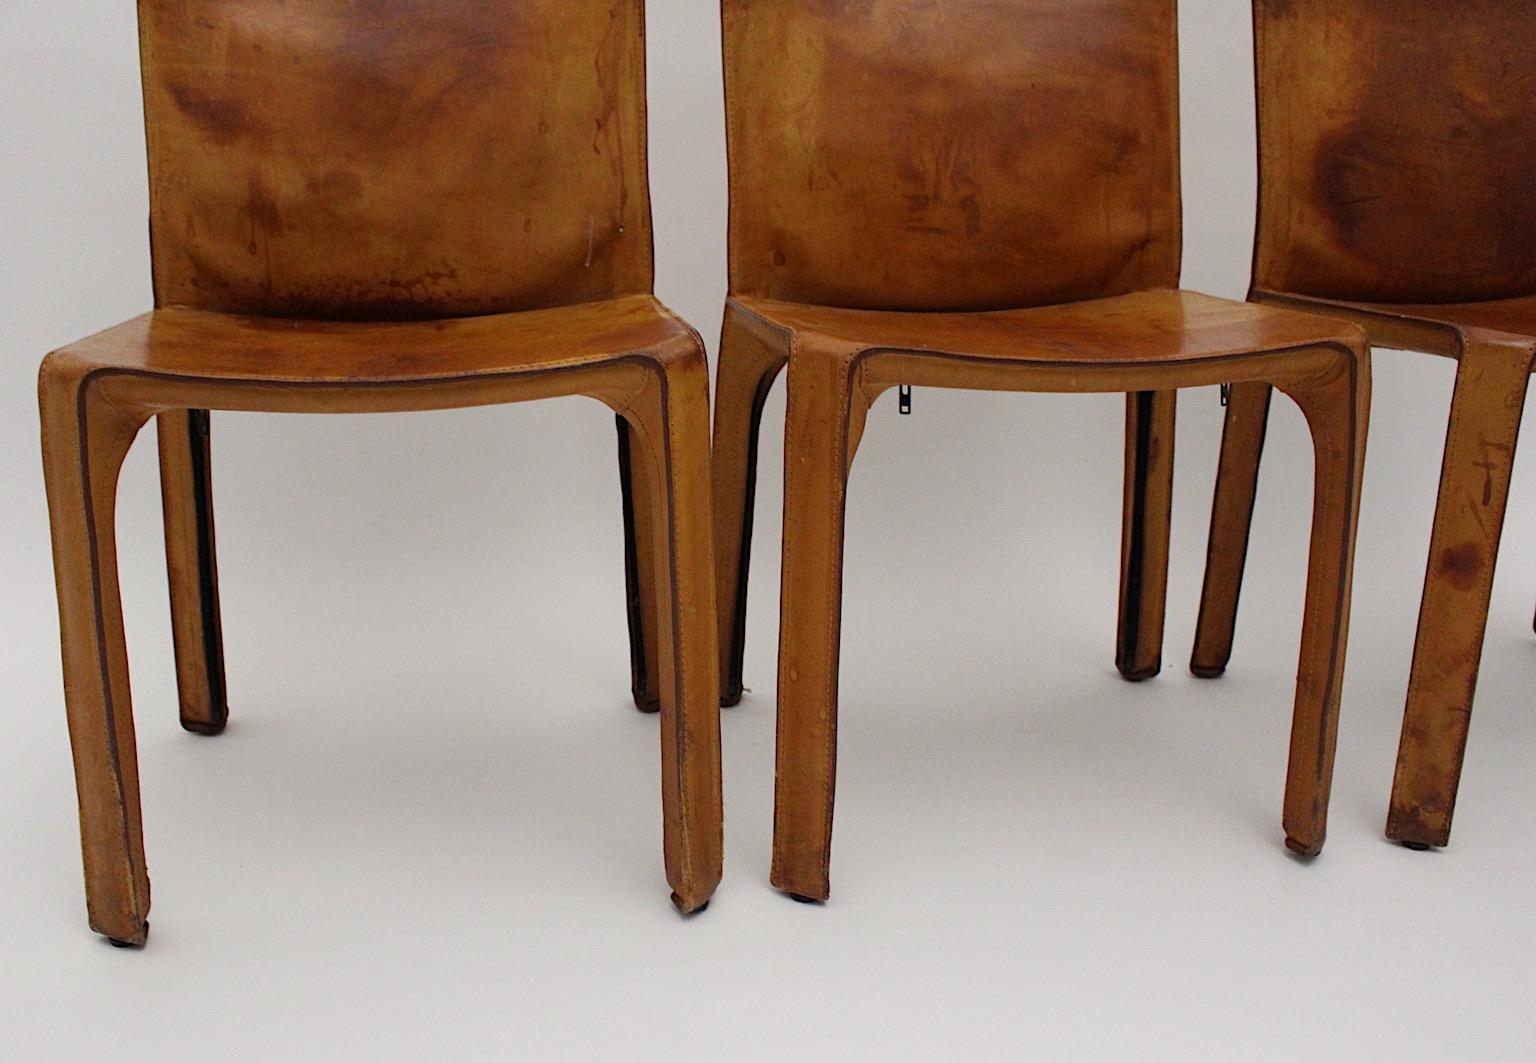 Three vintage dining chairs model CAB 412 from stitched leather in tan or cognac brown color tone
 by Mario Bellini 1977, Italy.
Iconic dining chairs, which were made from metal skeleton and stitched saddle leather.
Throughout the color tone and